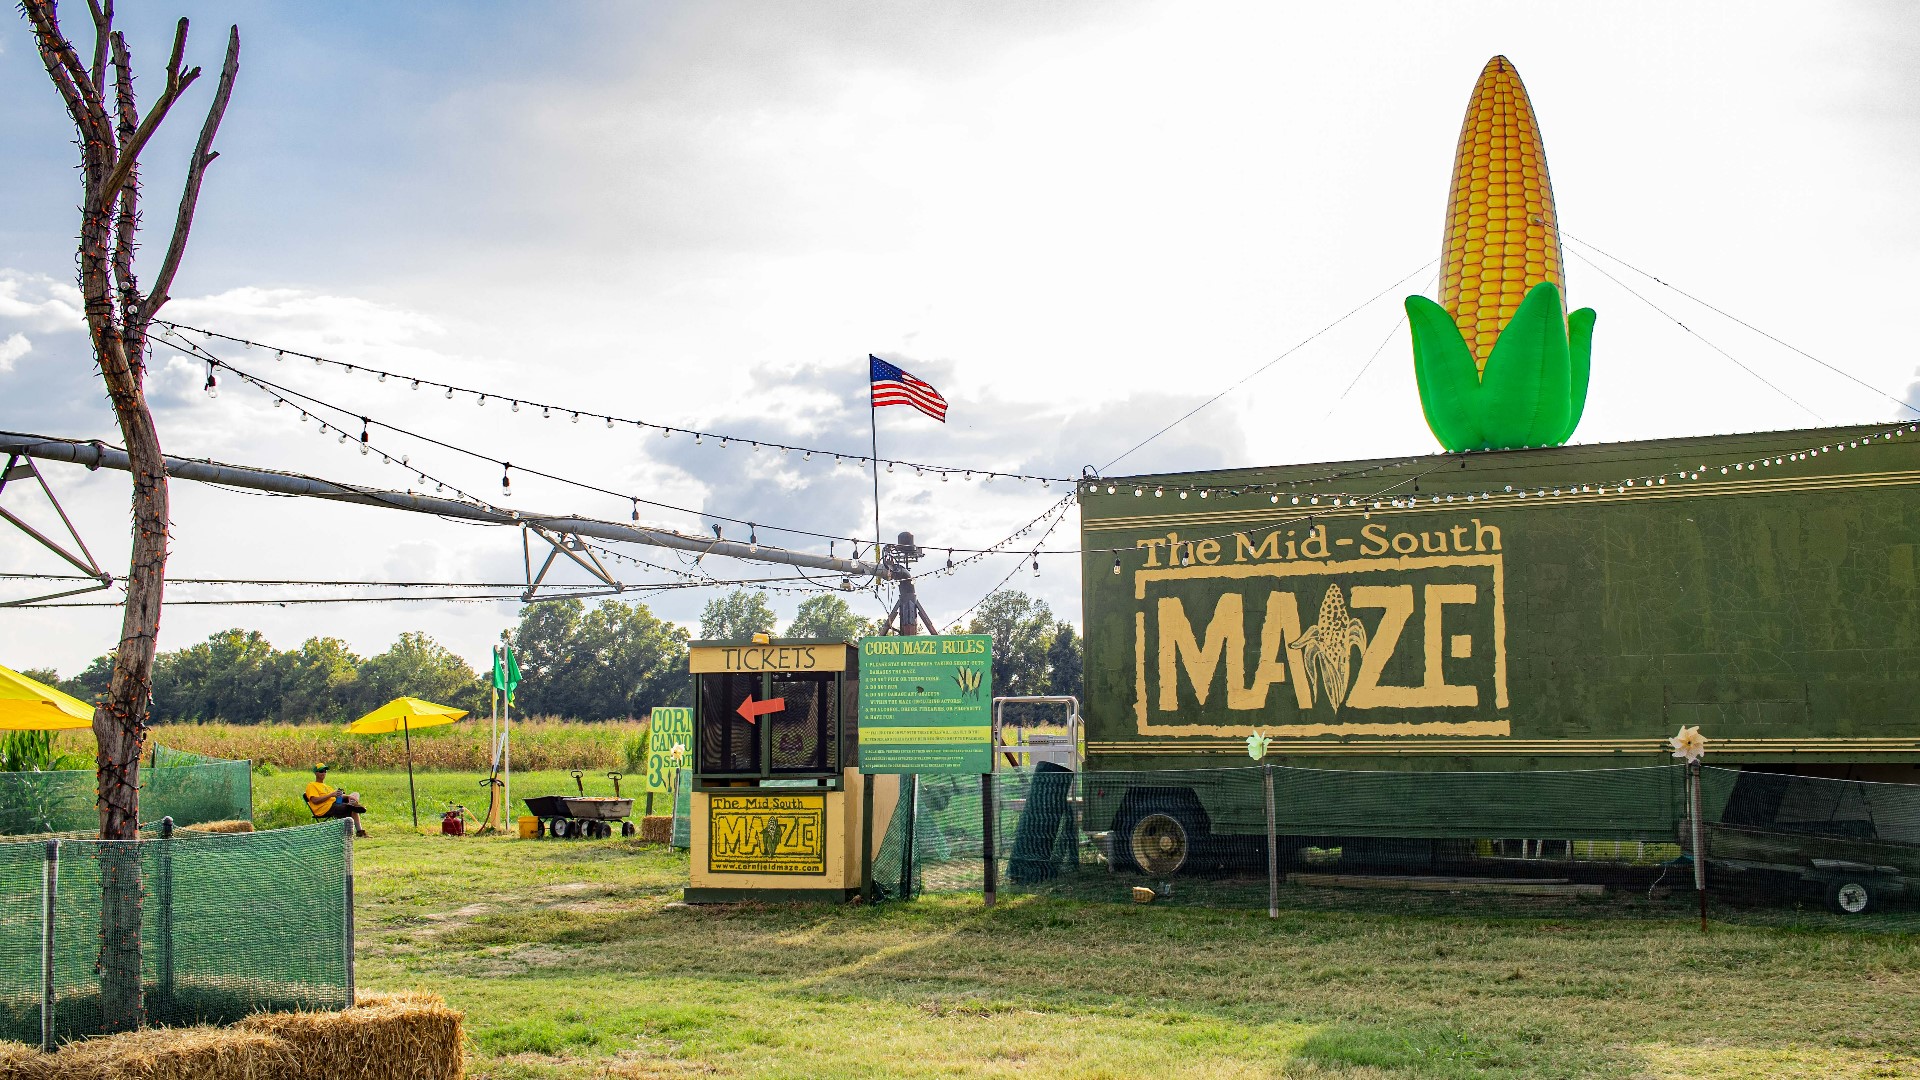 Get Lost corn maze arrives in Memphis just in time for Halloween